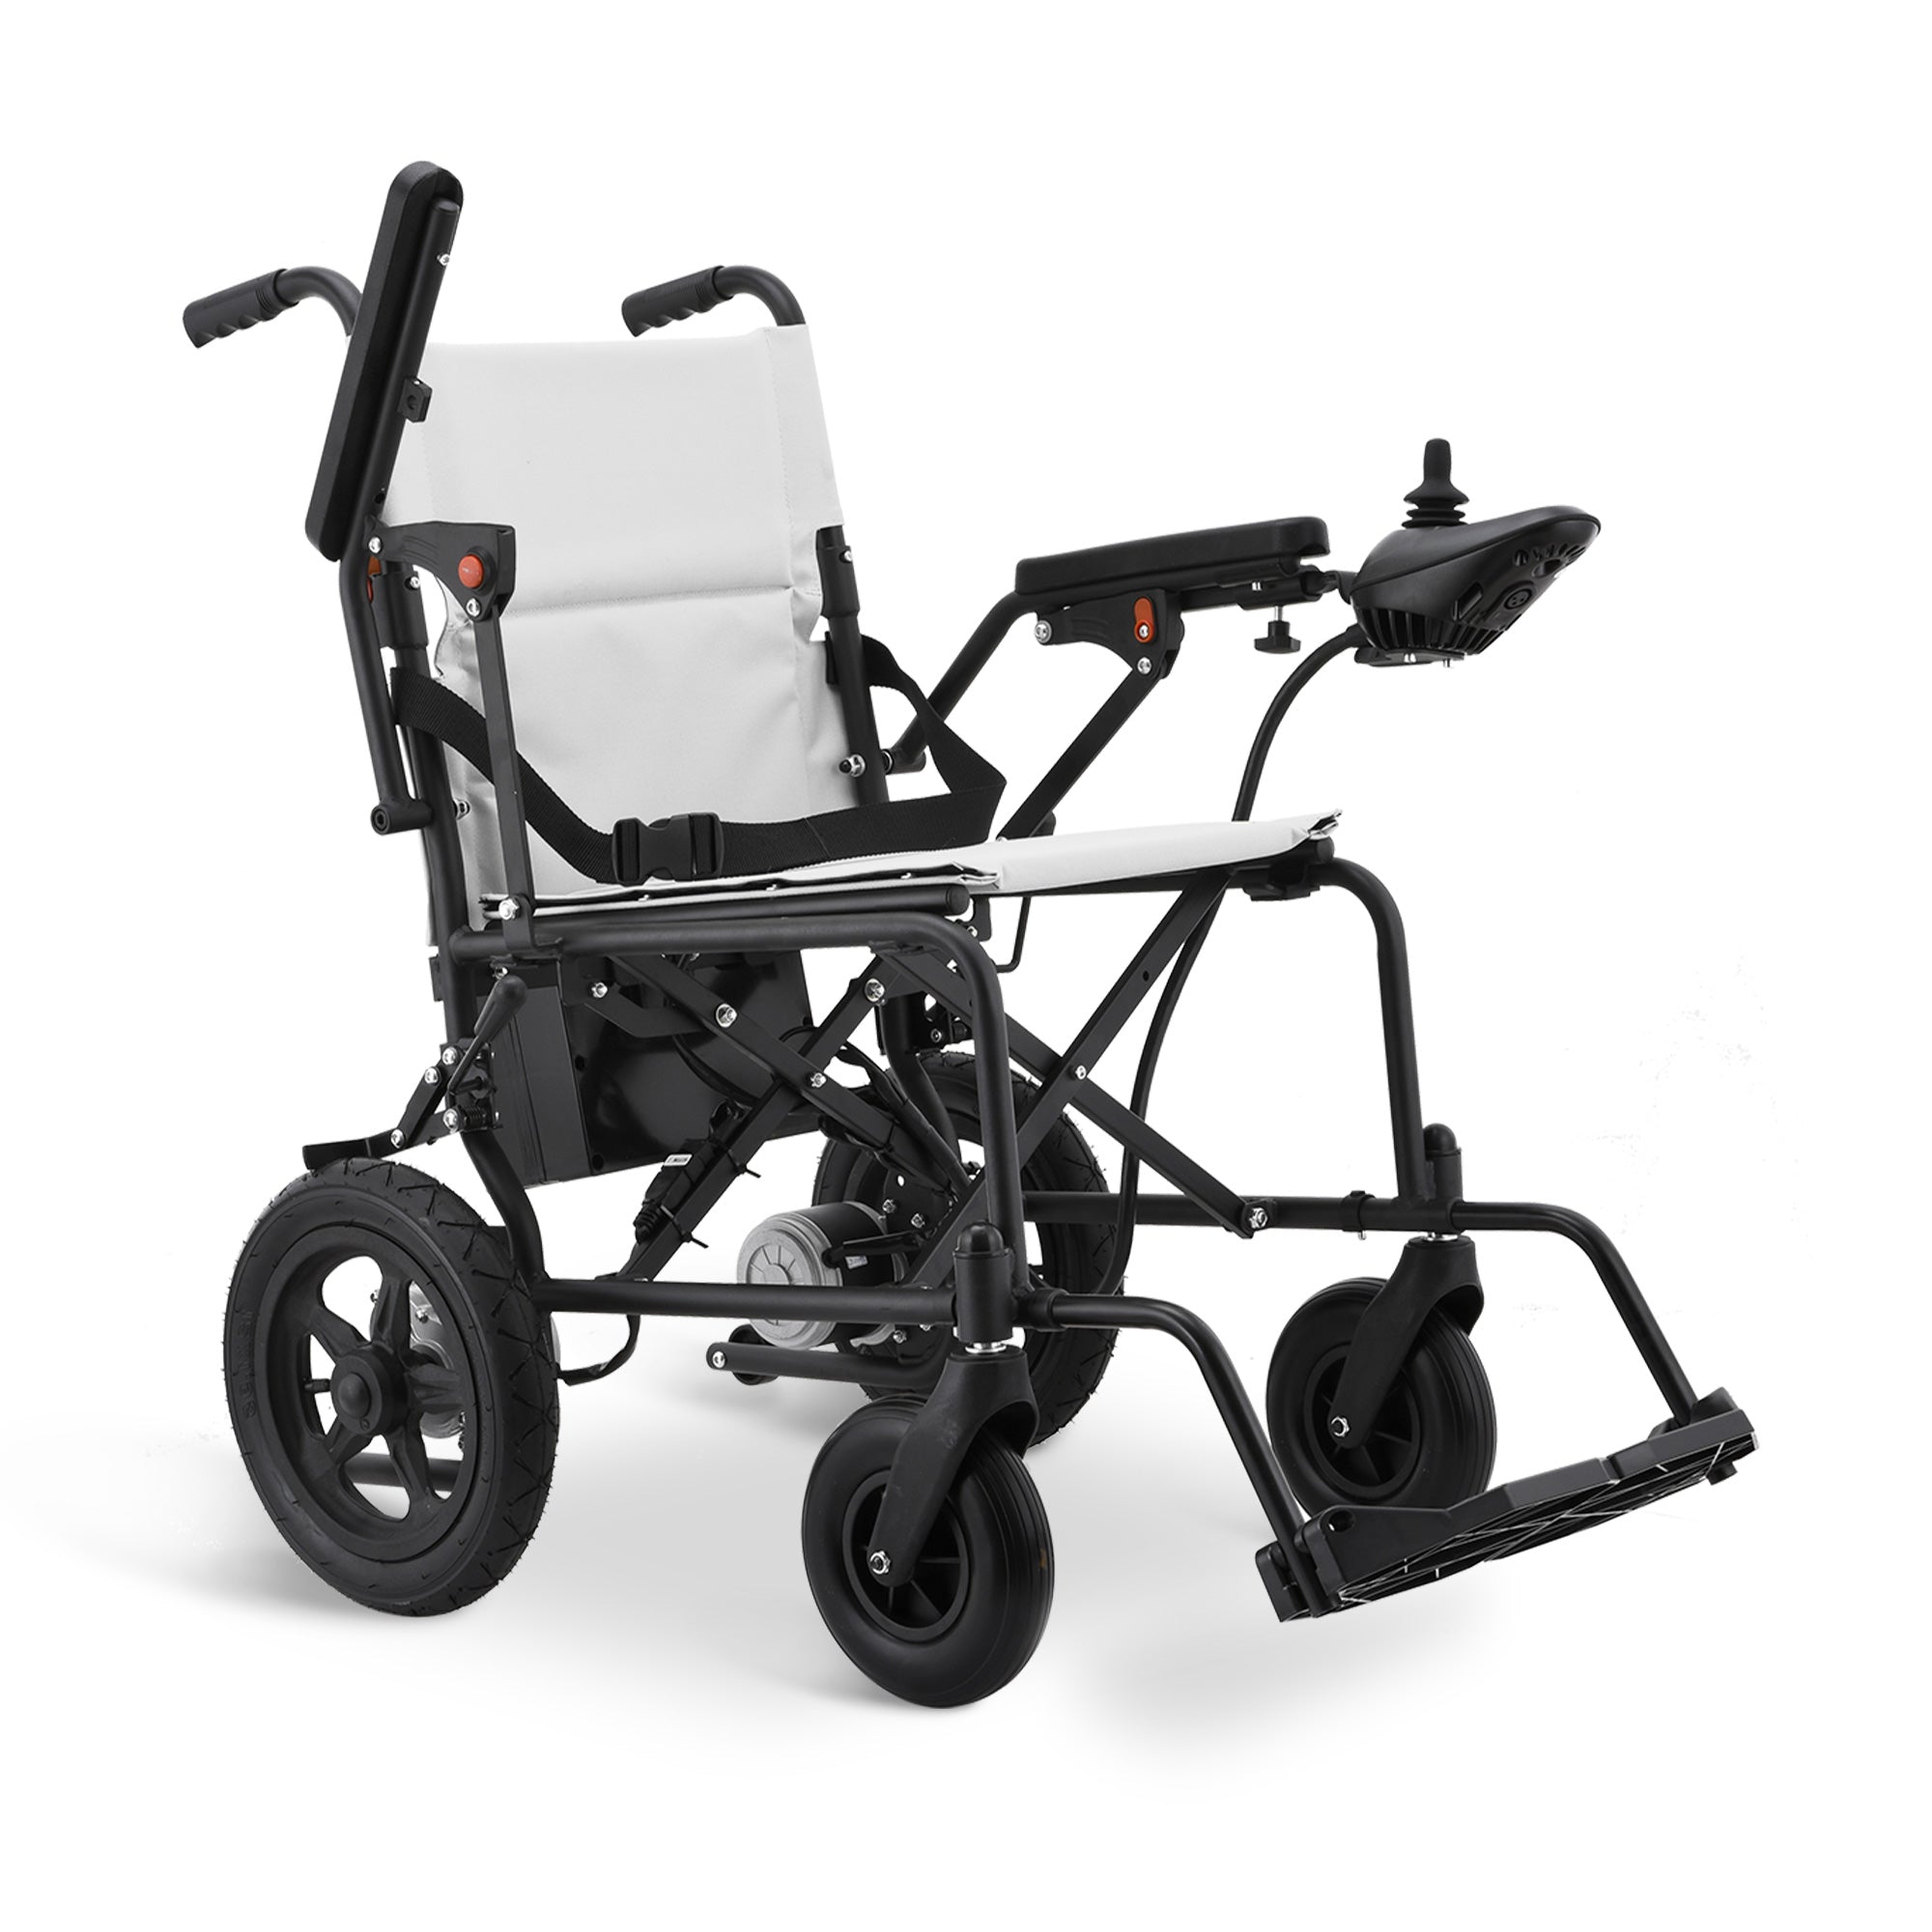 Klano KL20 - Lightweight and Powerful Electric Wheelchair